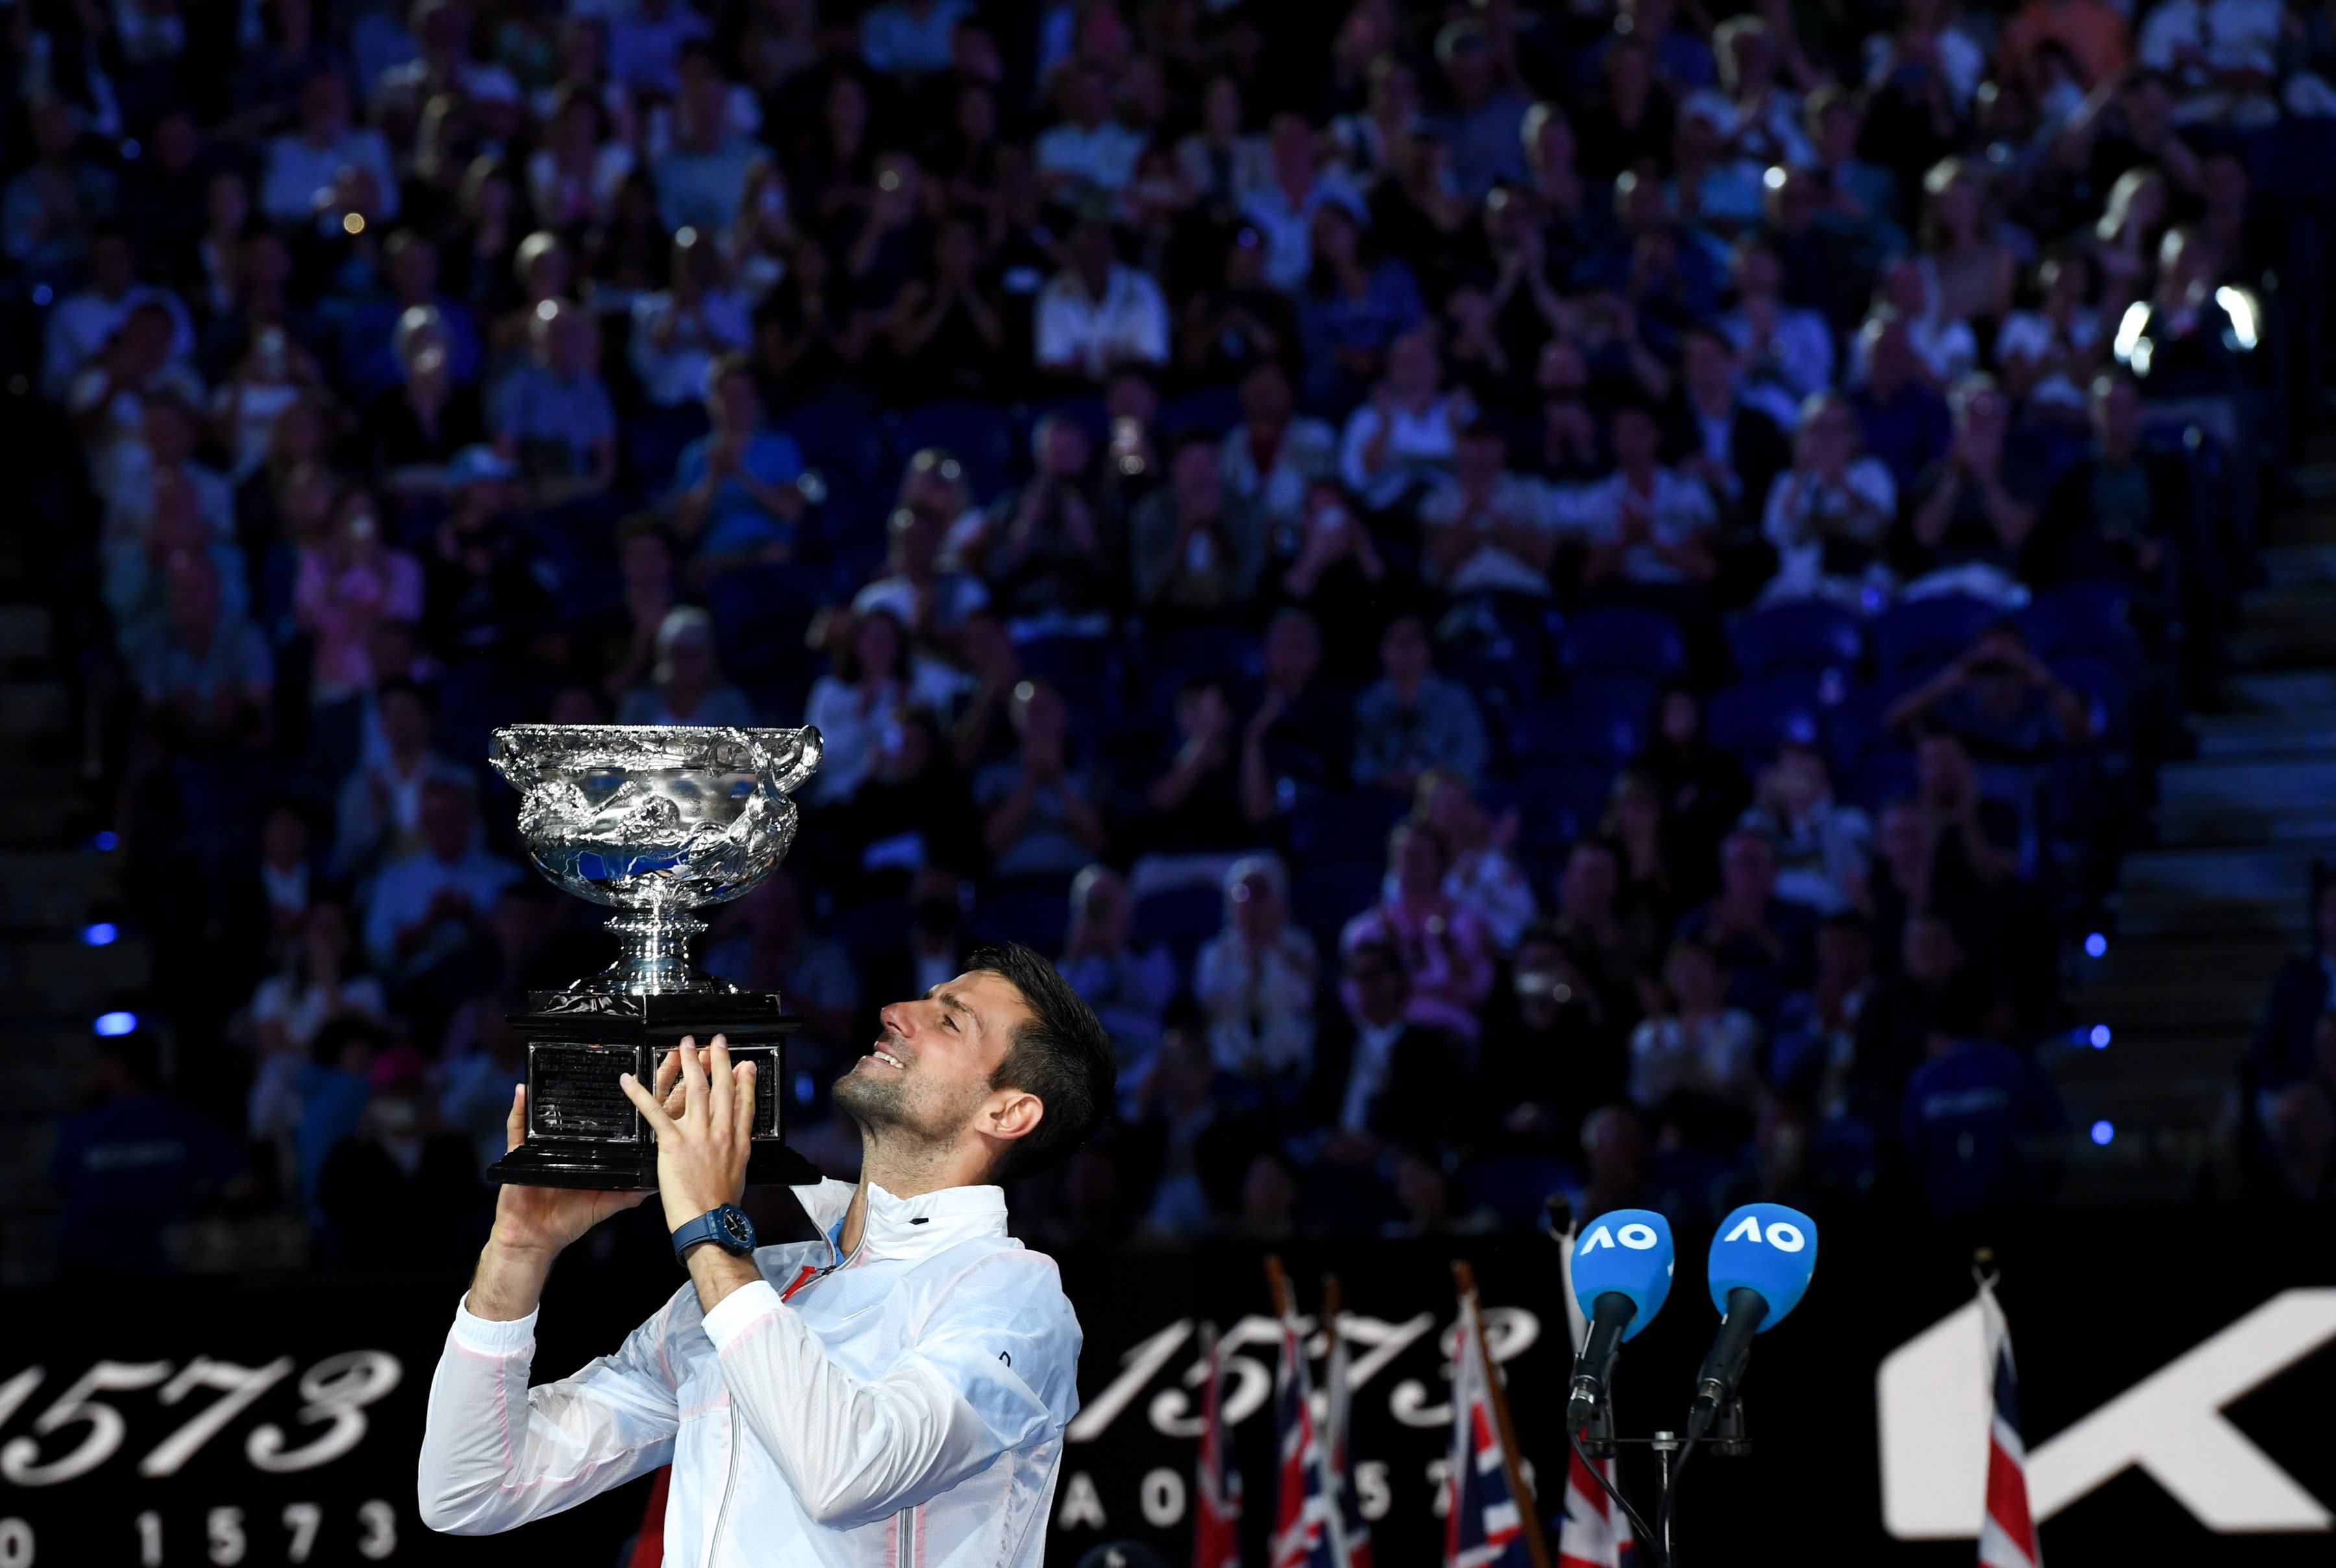 Novak Djokovic poses with his trophy after the men’s singles final at the Australian Open. Photo: Xinhua